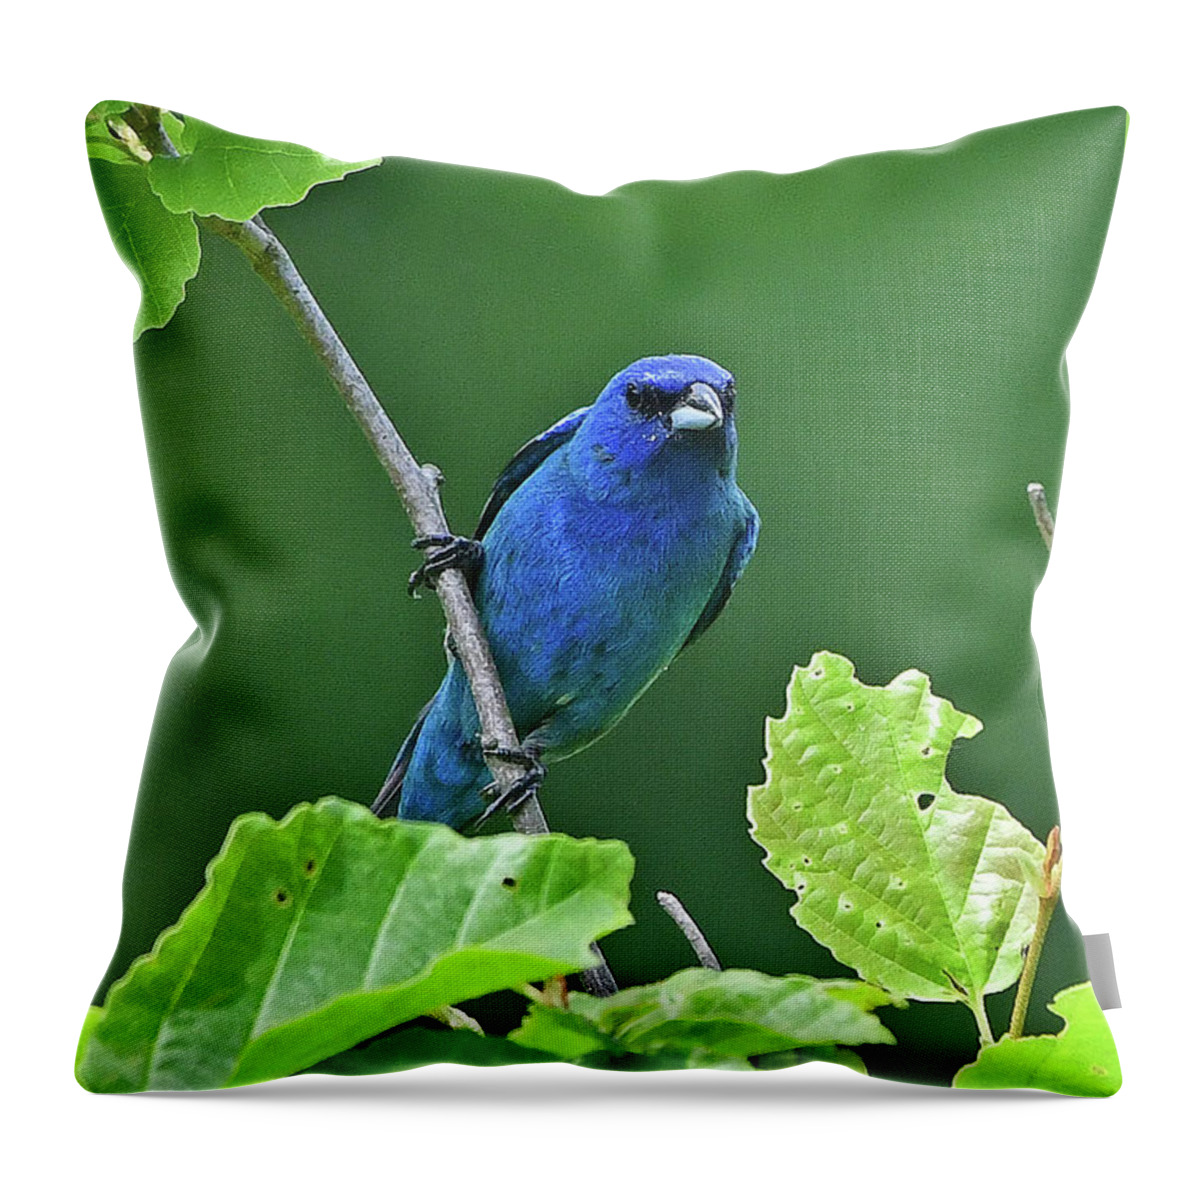 Indigo Bunting Throw Pillow featuring the photograph Indigo Bunting by Ken Stampfer